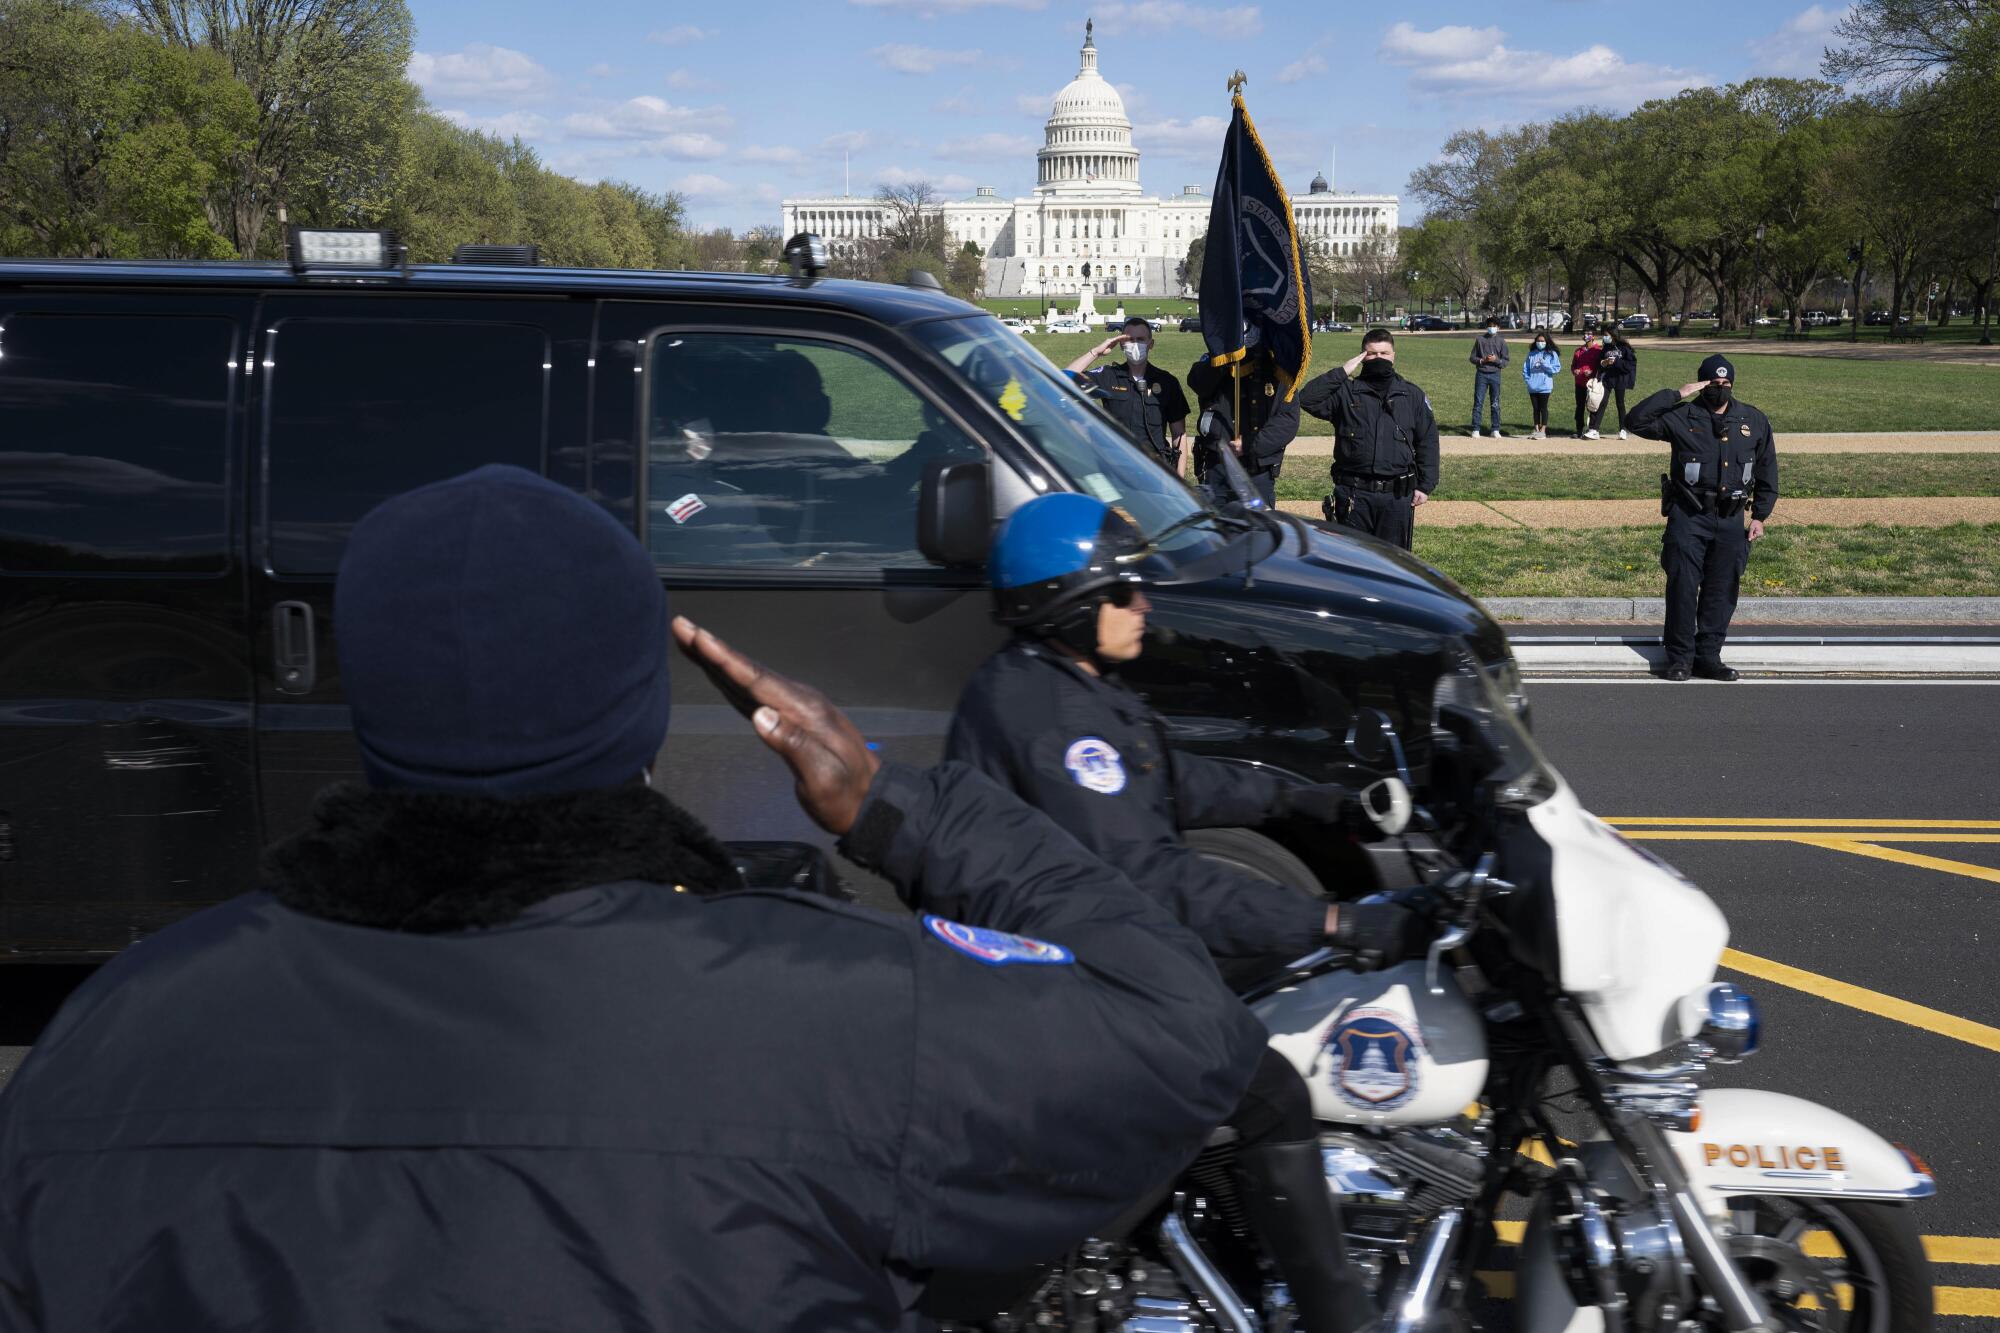 With the U.S. Capitol in the background, U.S. Capitol Police officers salute as procession goes by.